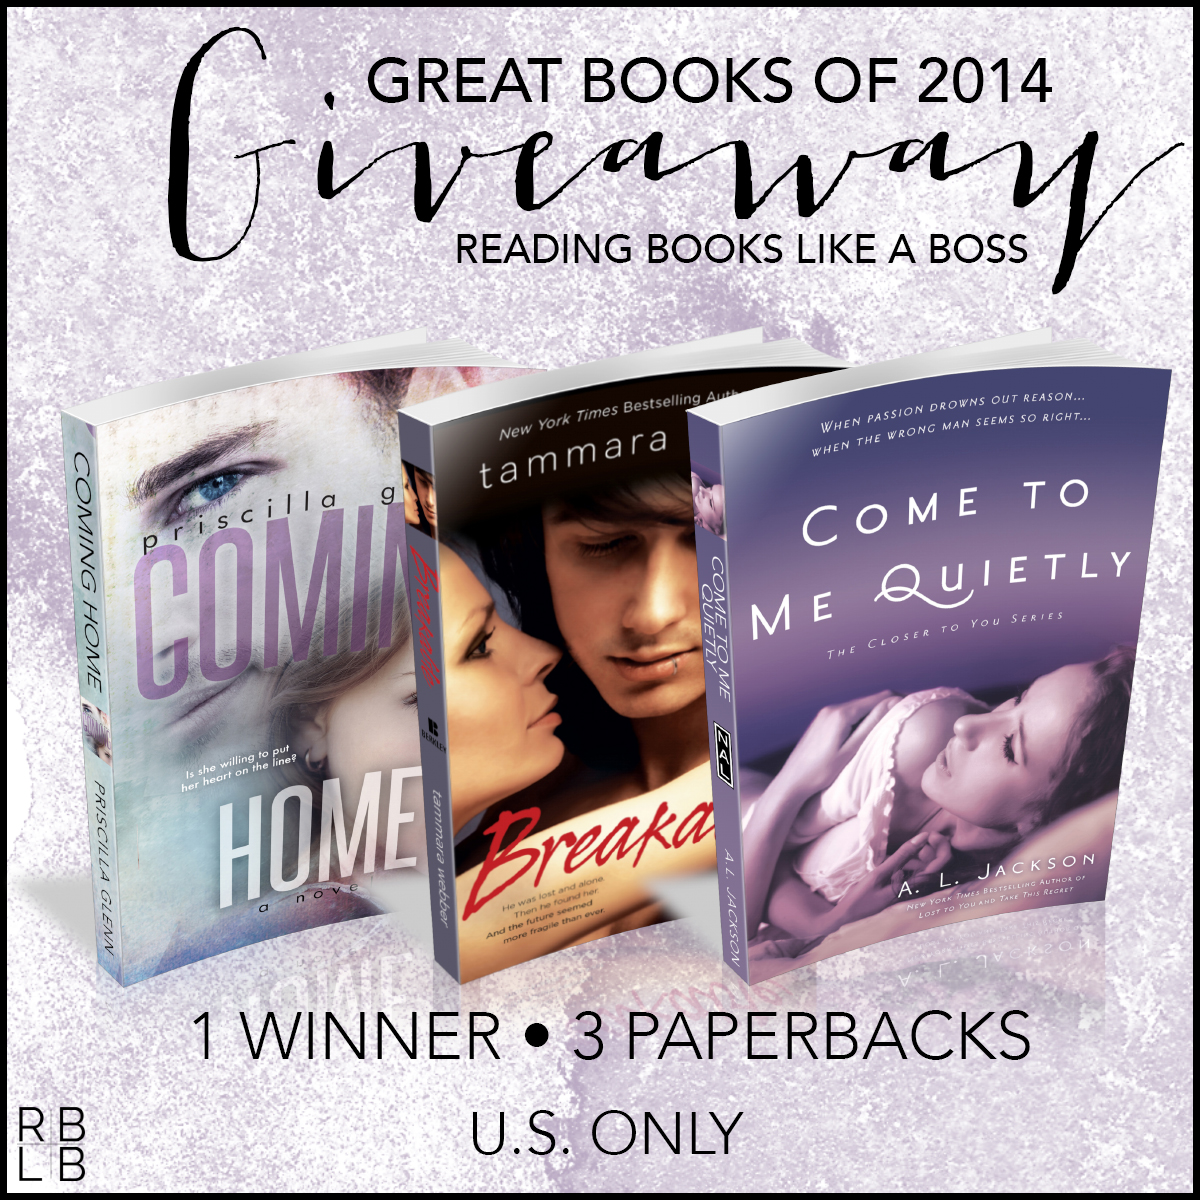 Great Books of 2014 Giveaway